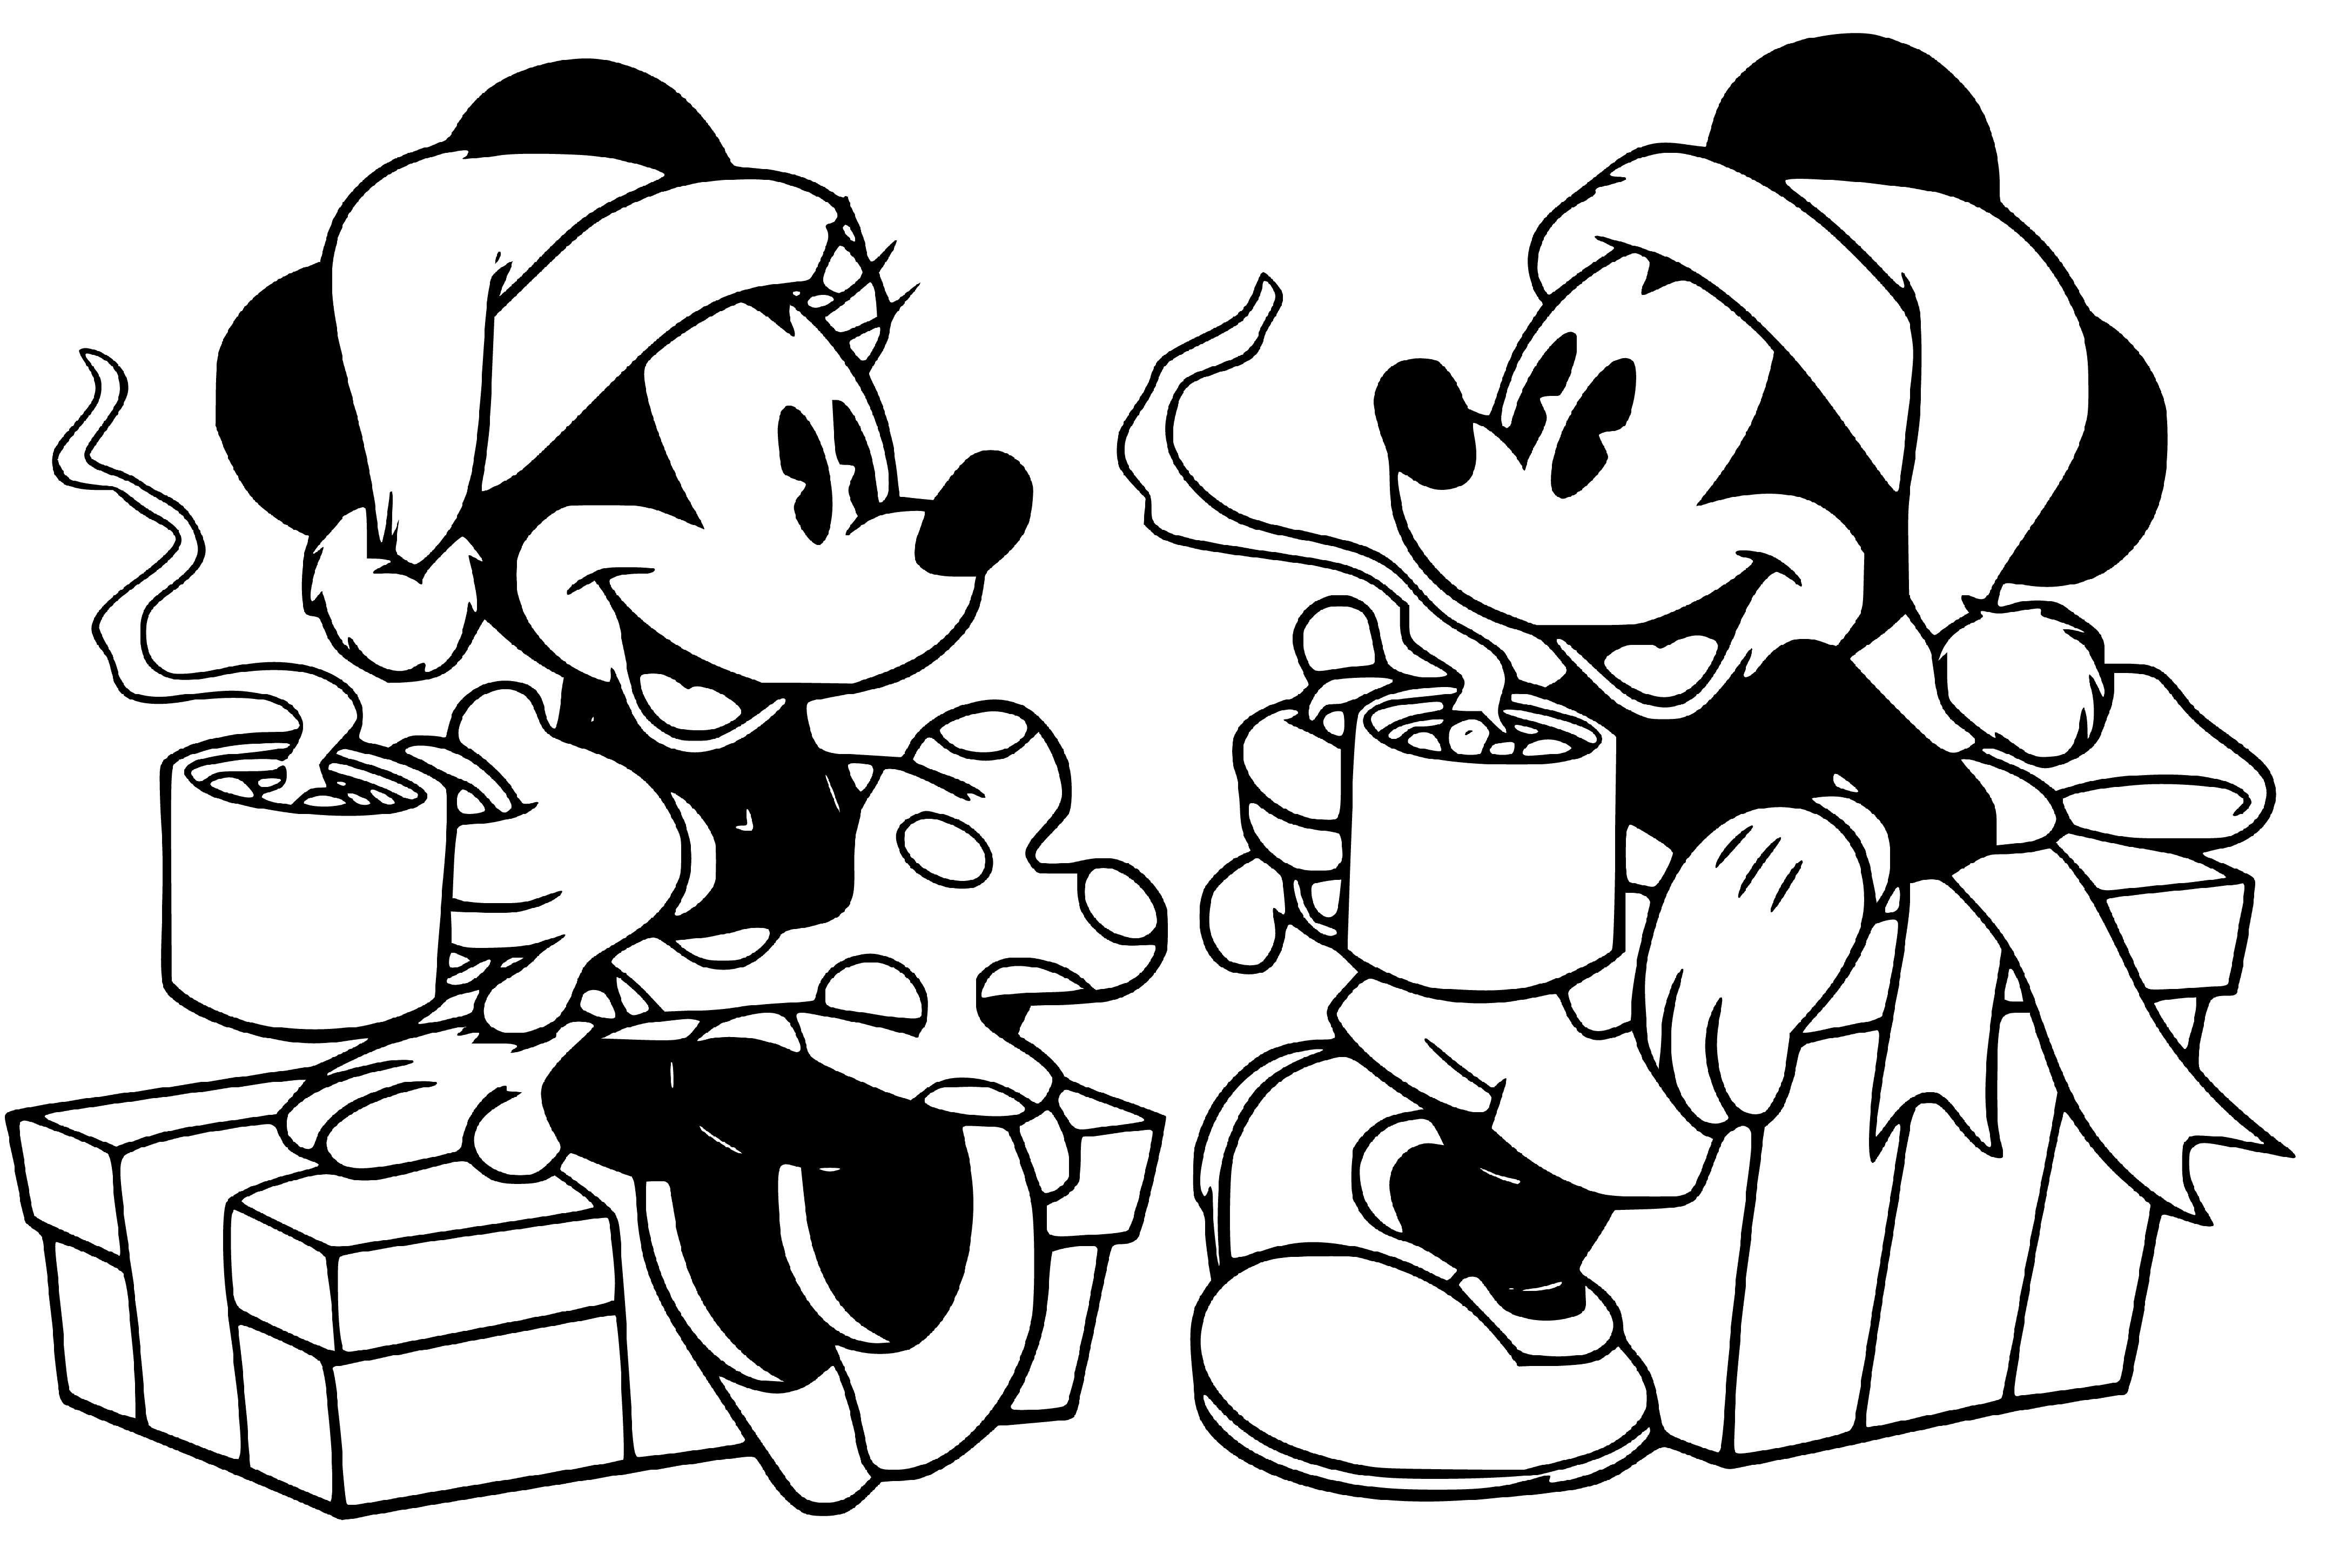 Mickey Mouse and Minnie Mouse Christmas Coloring Page - SheetalColor.com